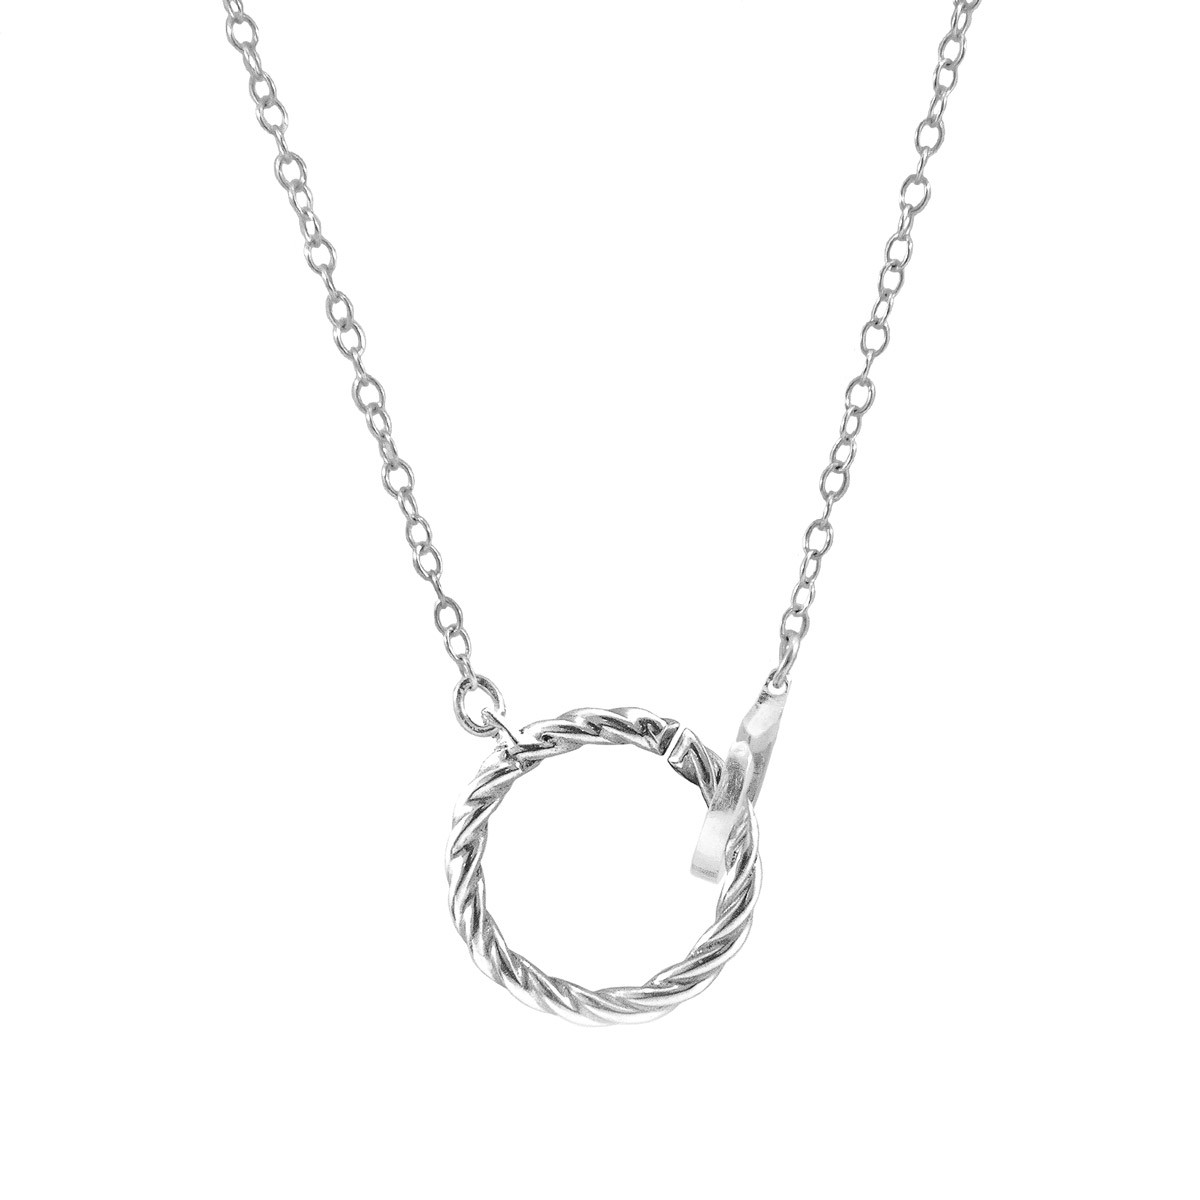 Twirled Rope Link Paradise Silver Necklace Pendant